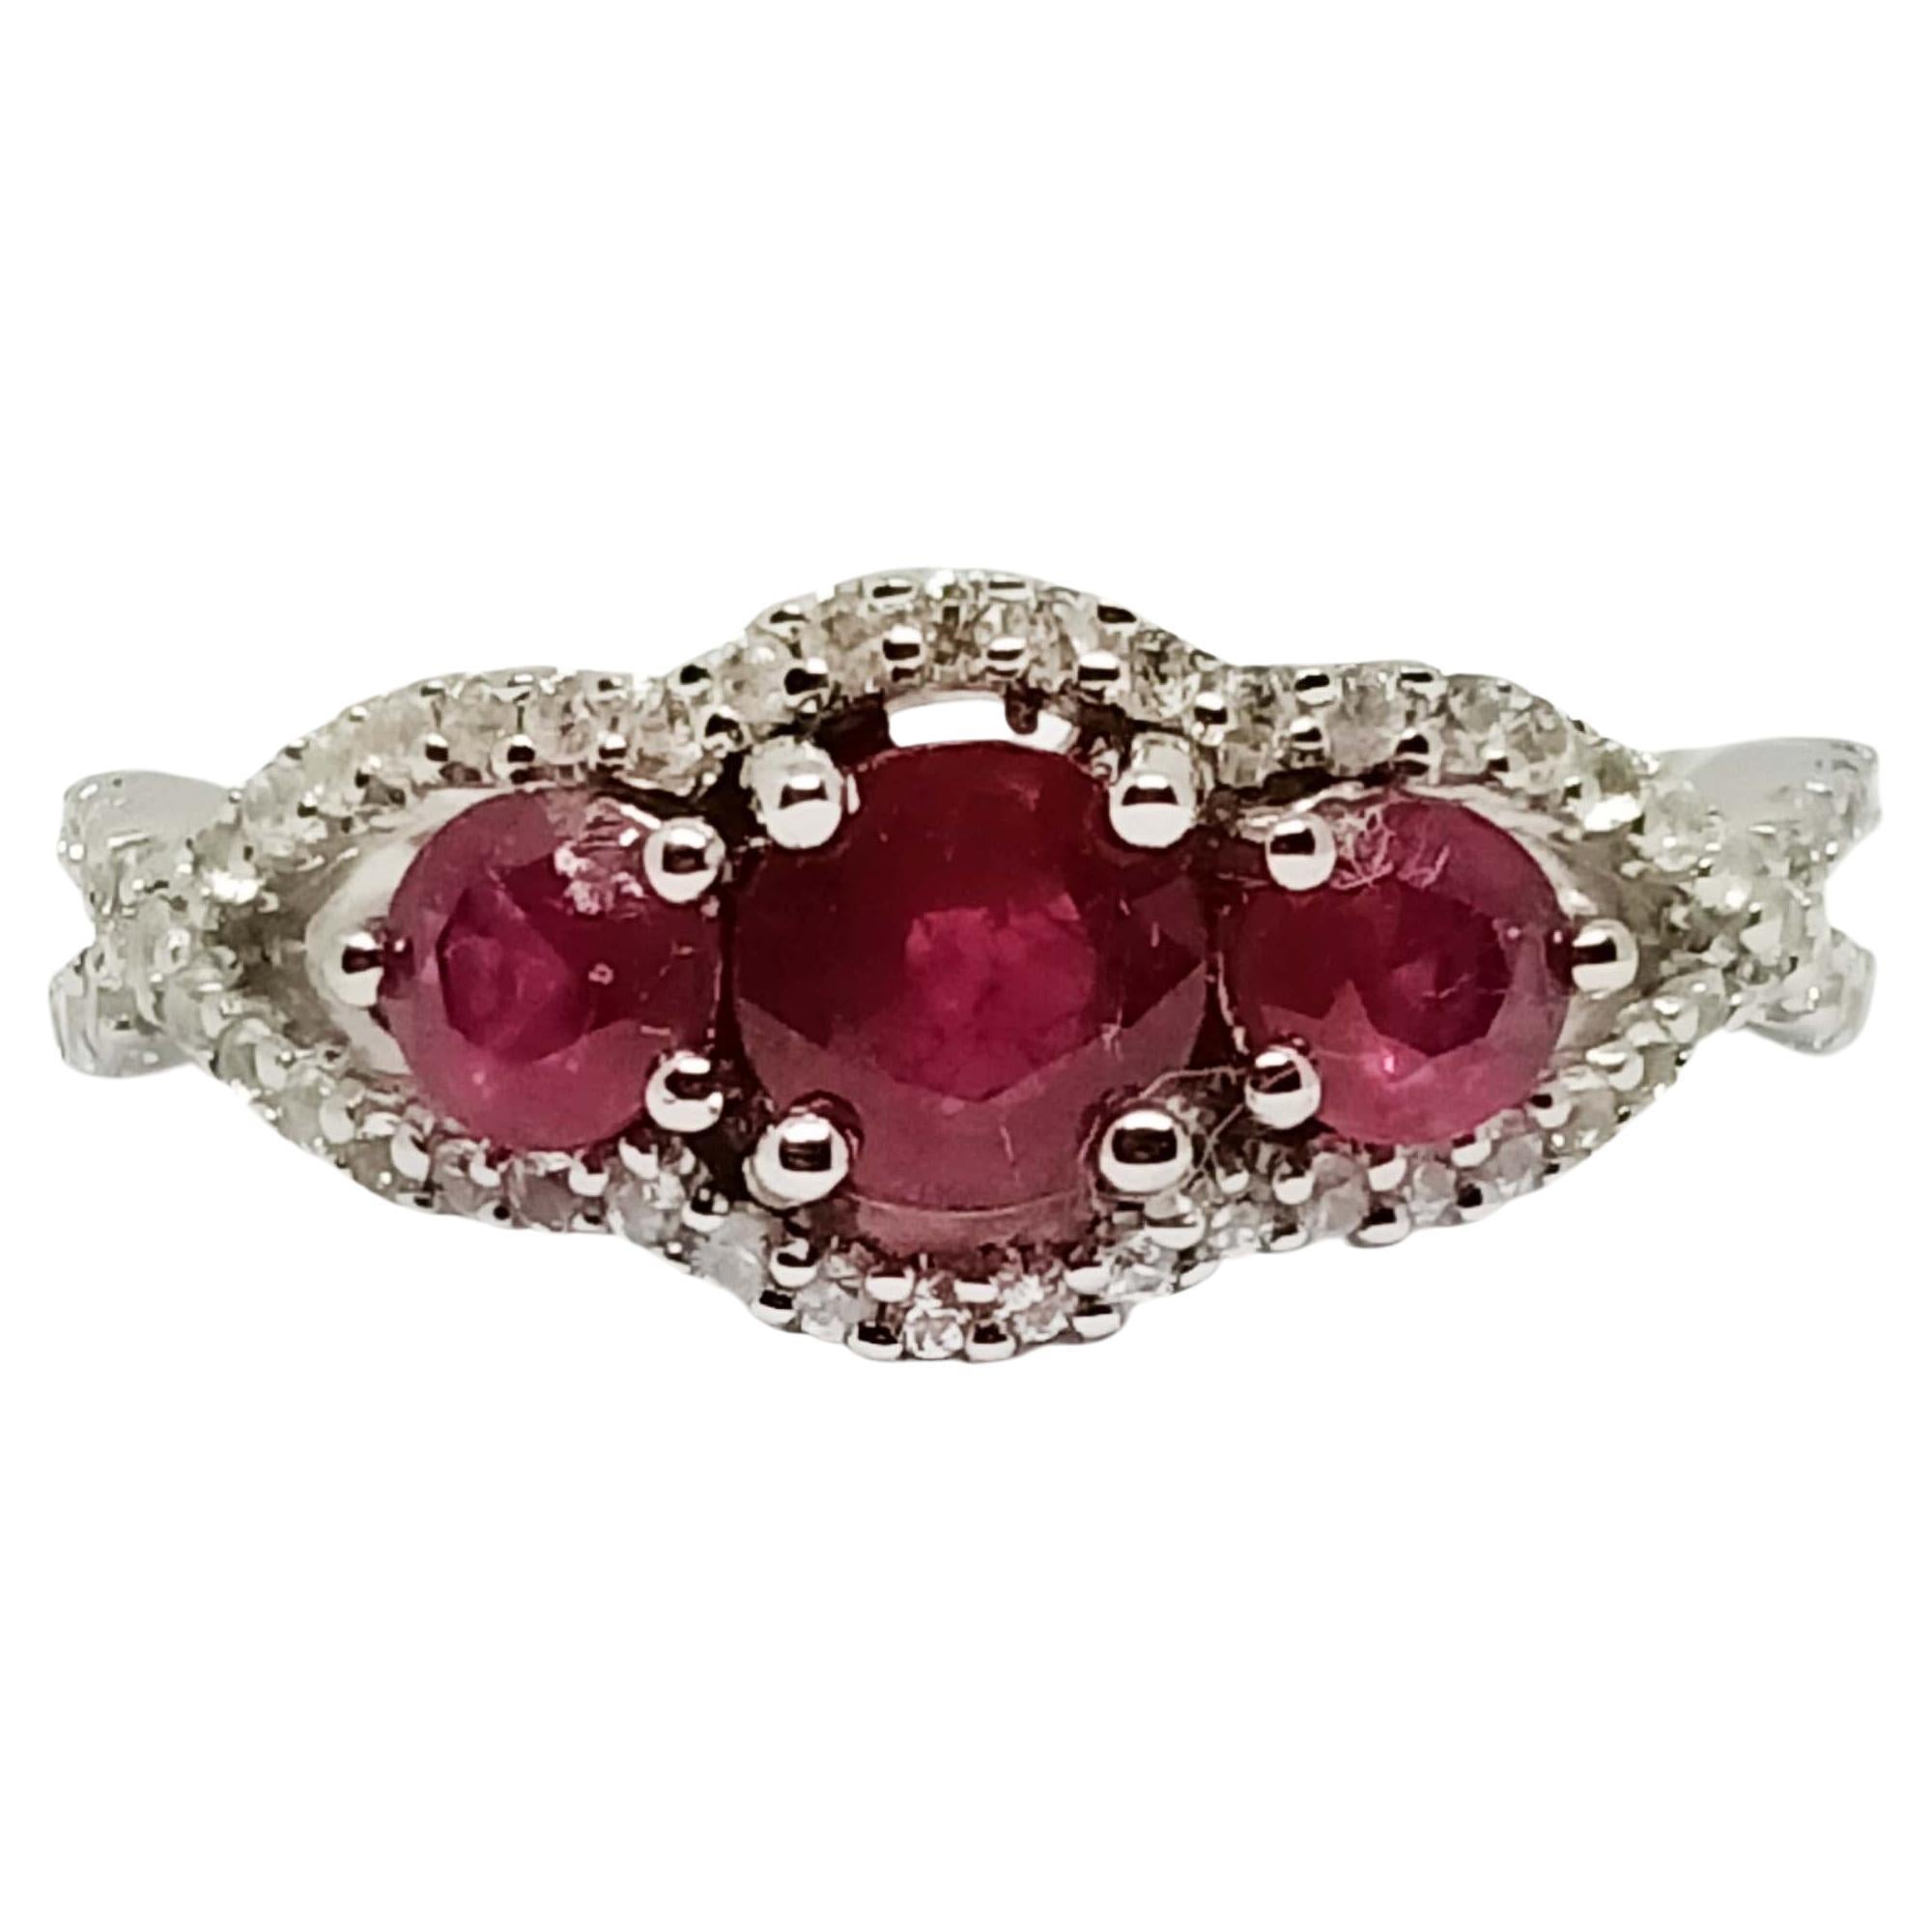 Ruby ring 1.85 cts withs white zircon